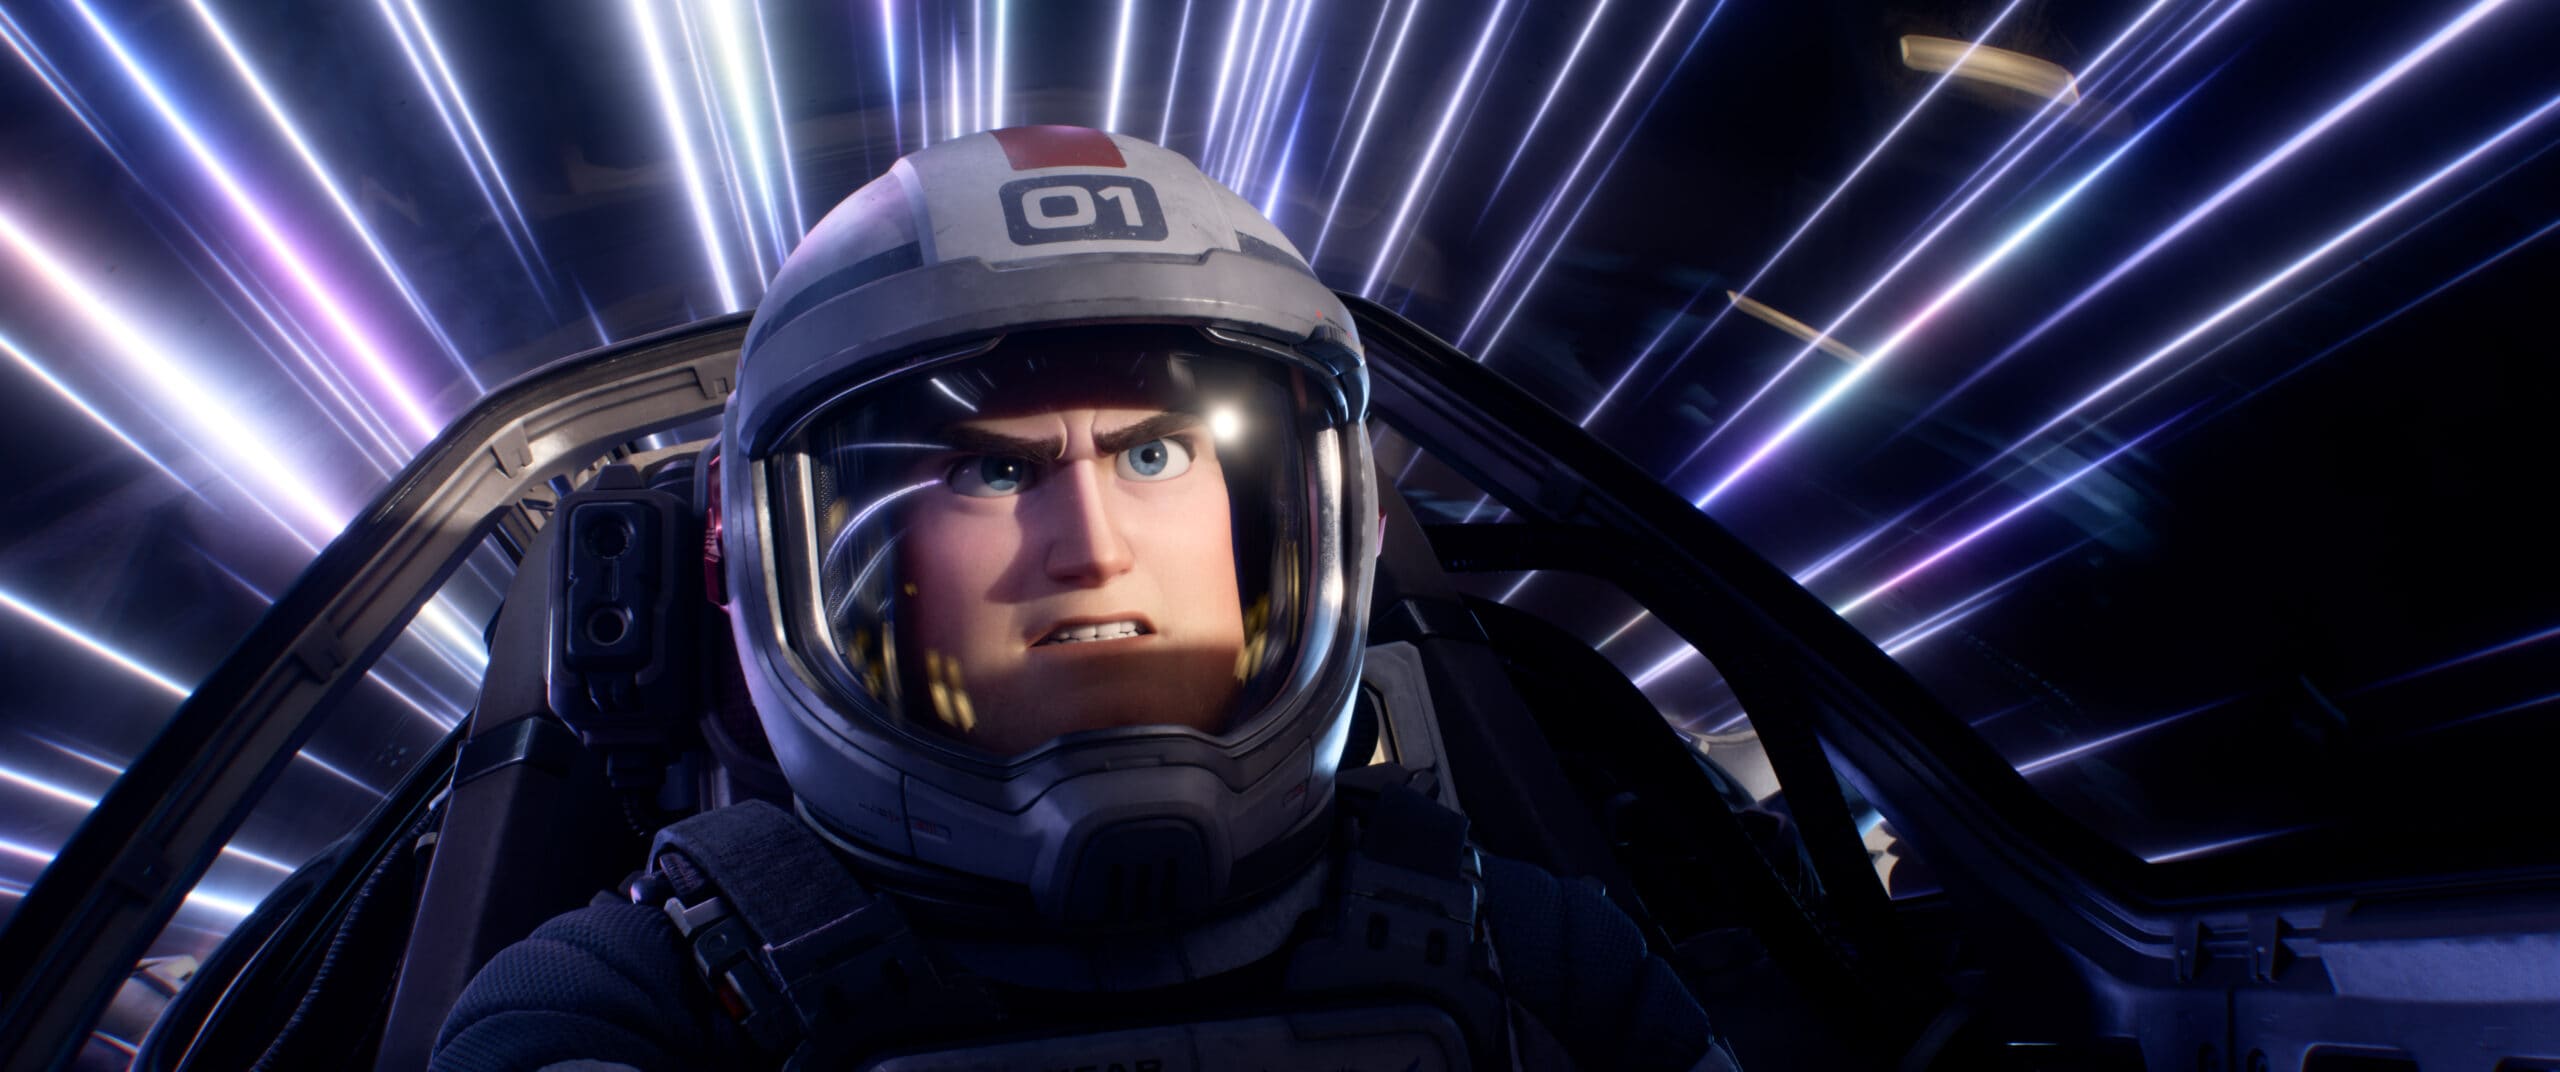 Lightyear Features Nods to Classic Sci-Fi Films